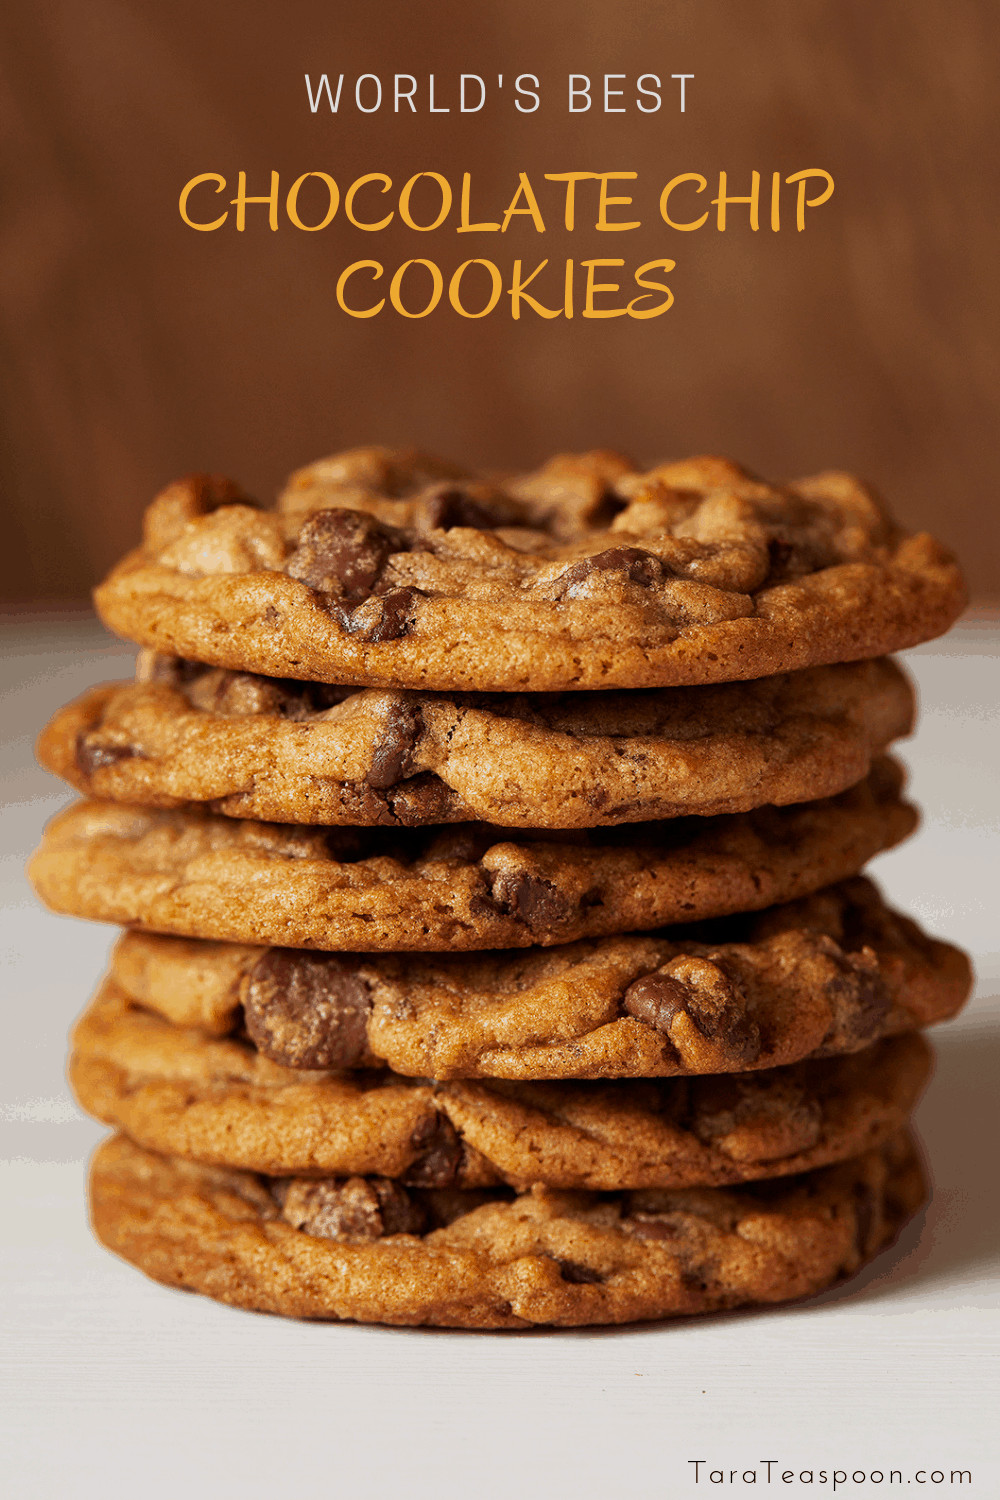 World'S Best Chocolate Chip Cookies
 The Best Chocolate Chip Cookies In The World